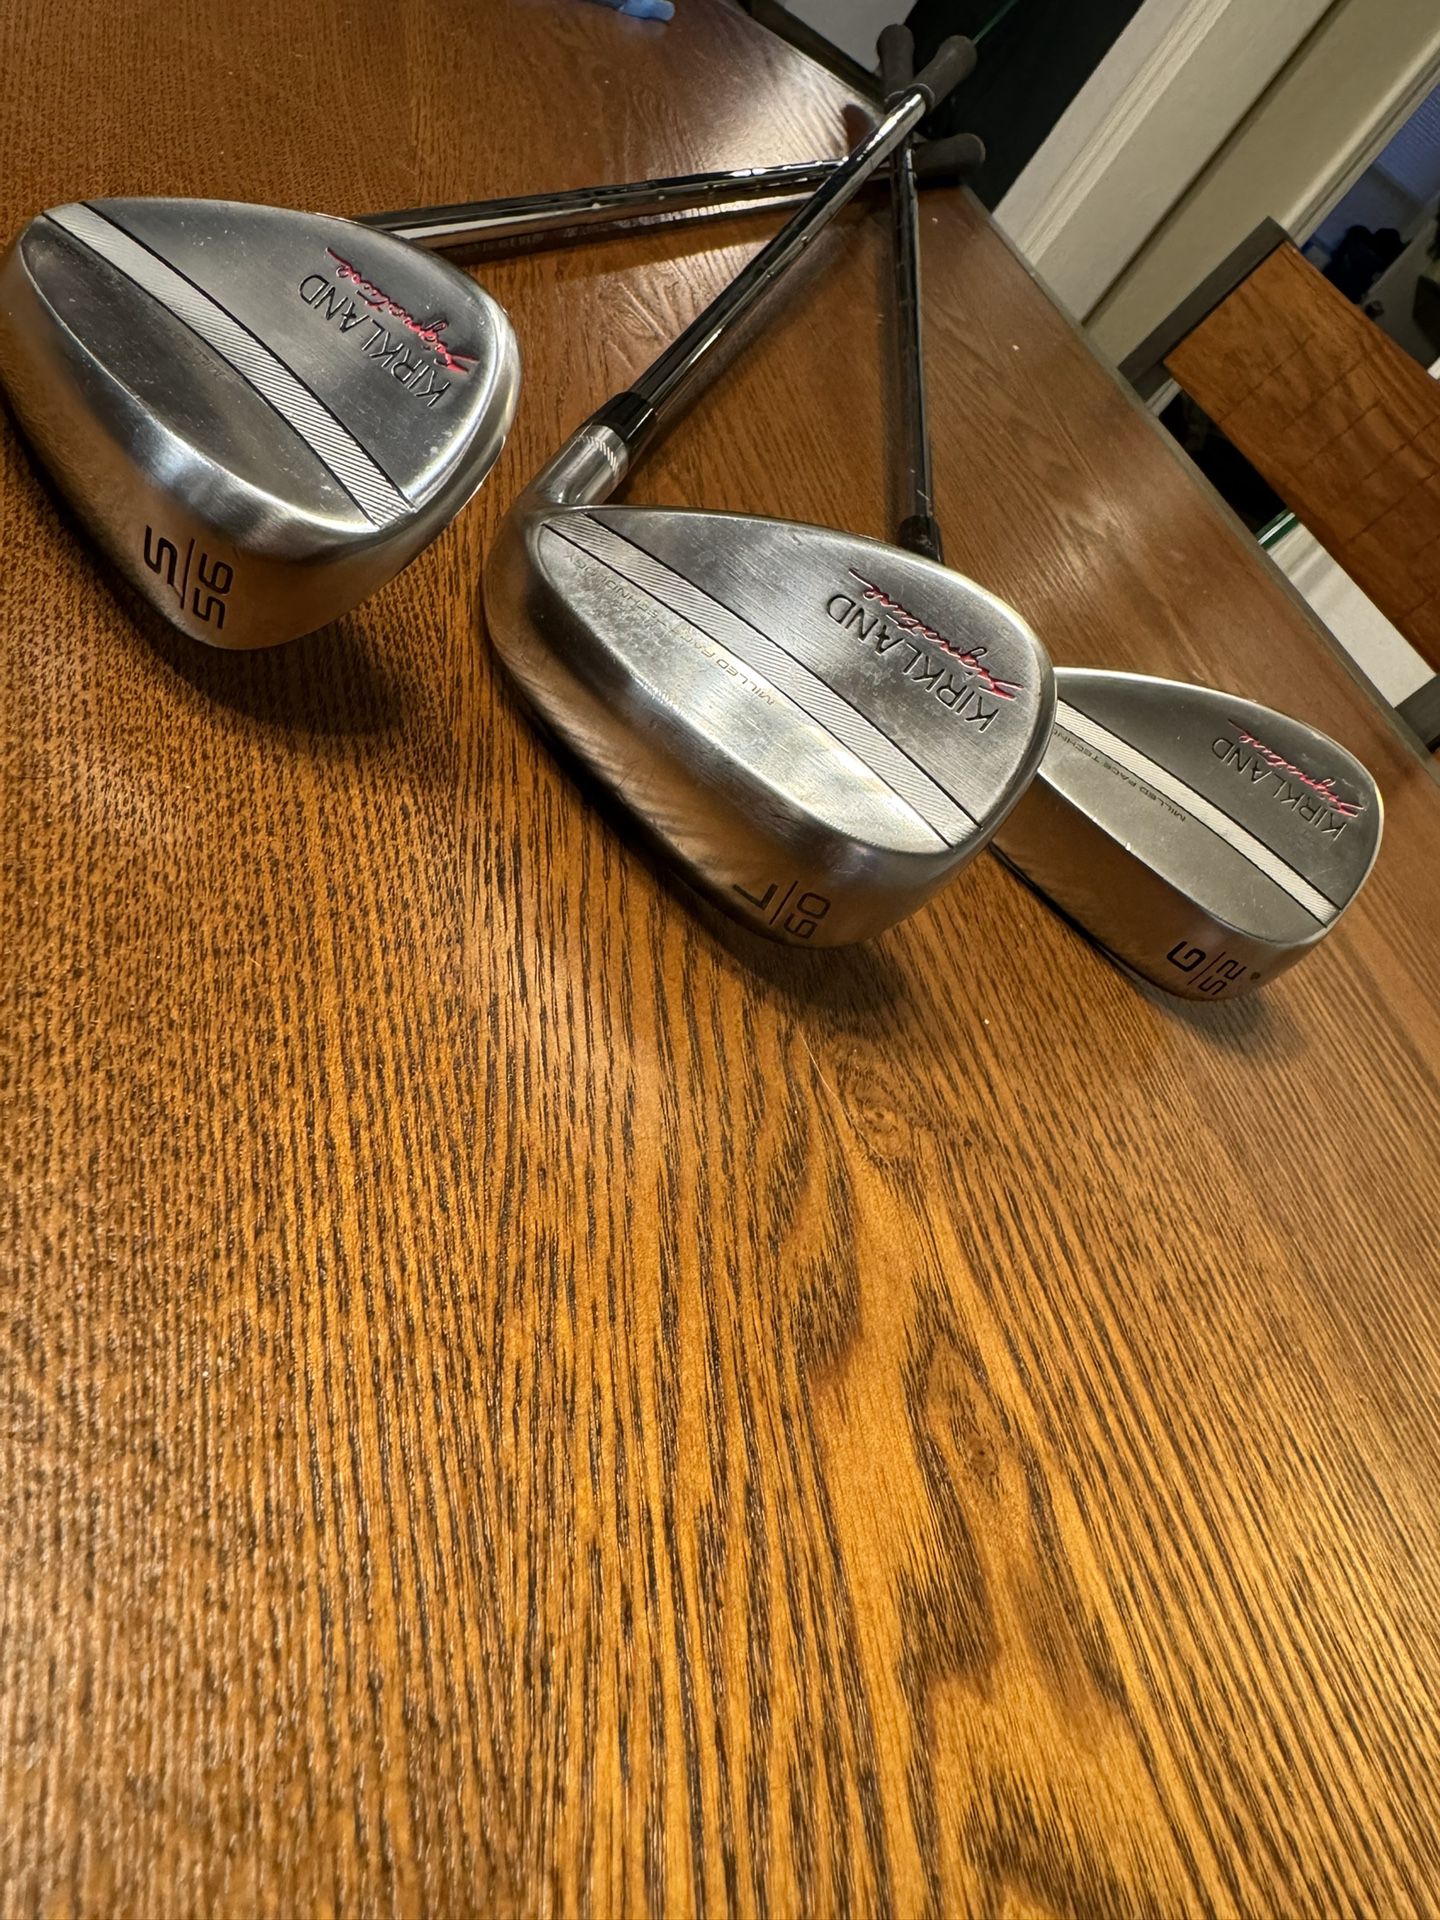 Golf Clubs And Golf Bag For Sale (updated Items)